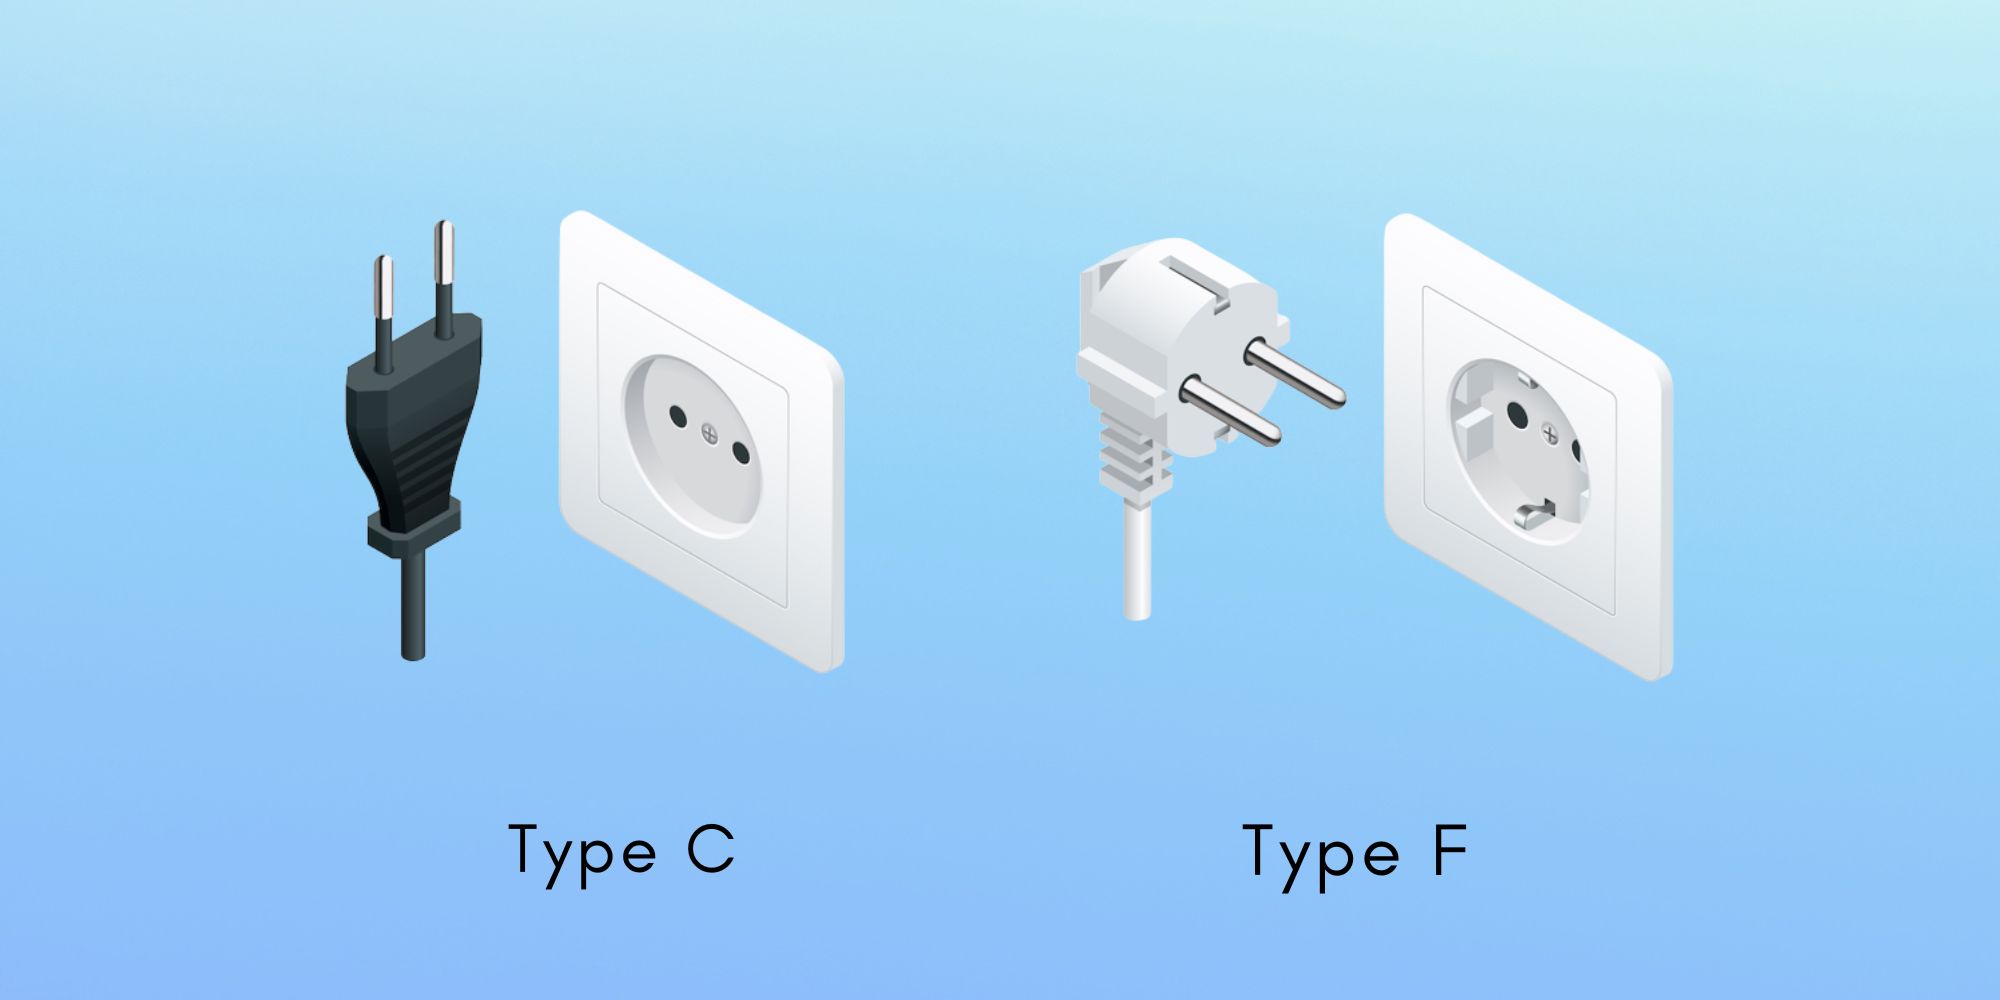 Iceland Power Plugs and Sockets: Type C and Type F
